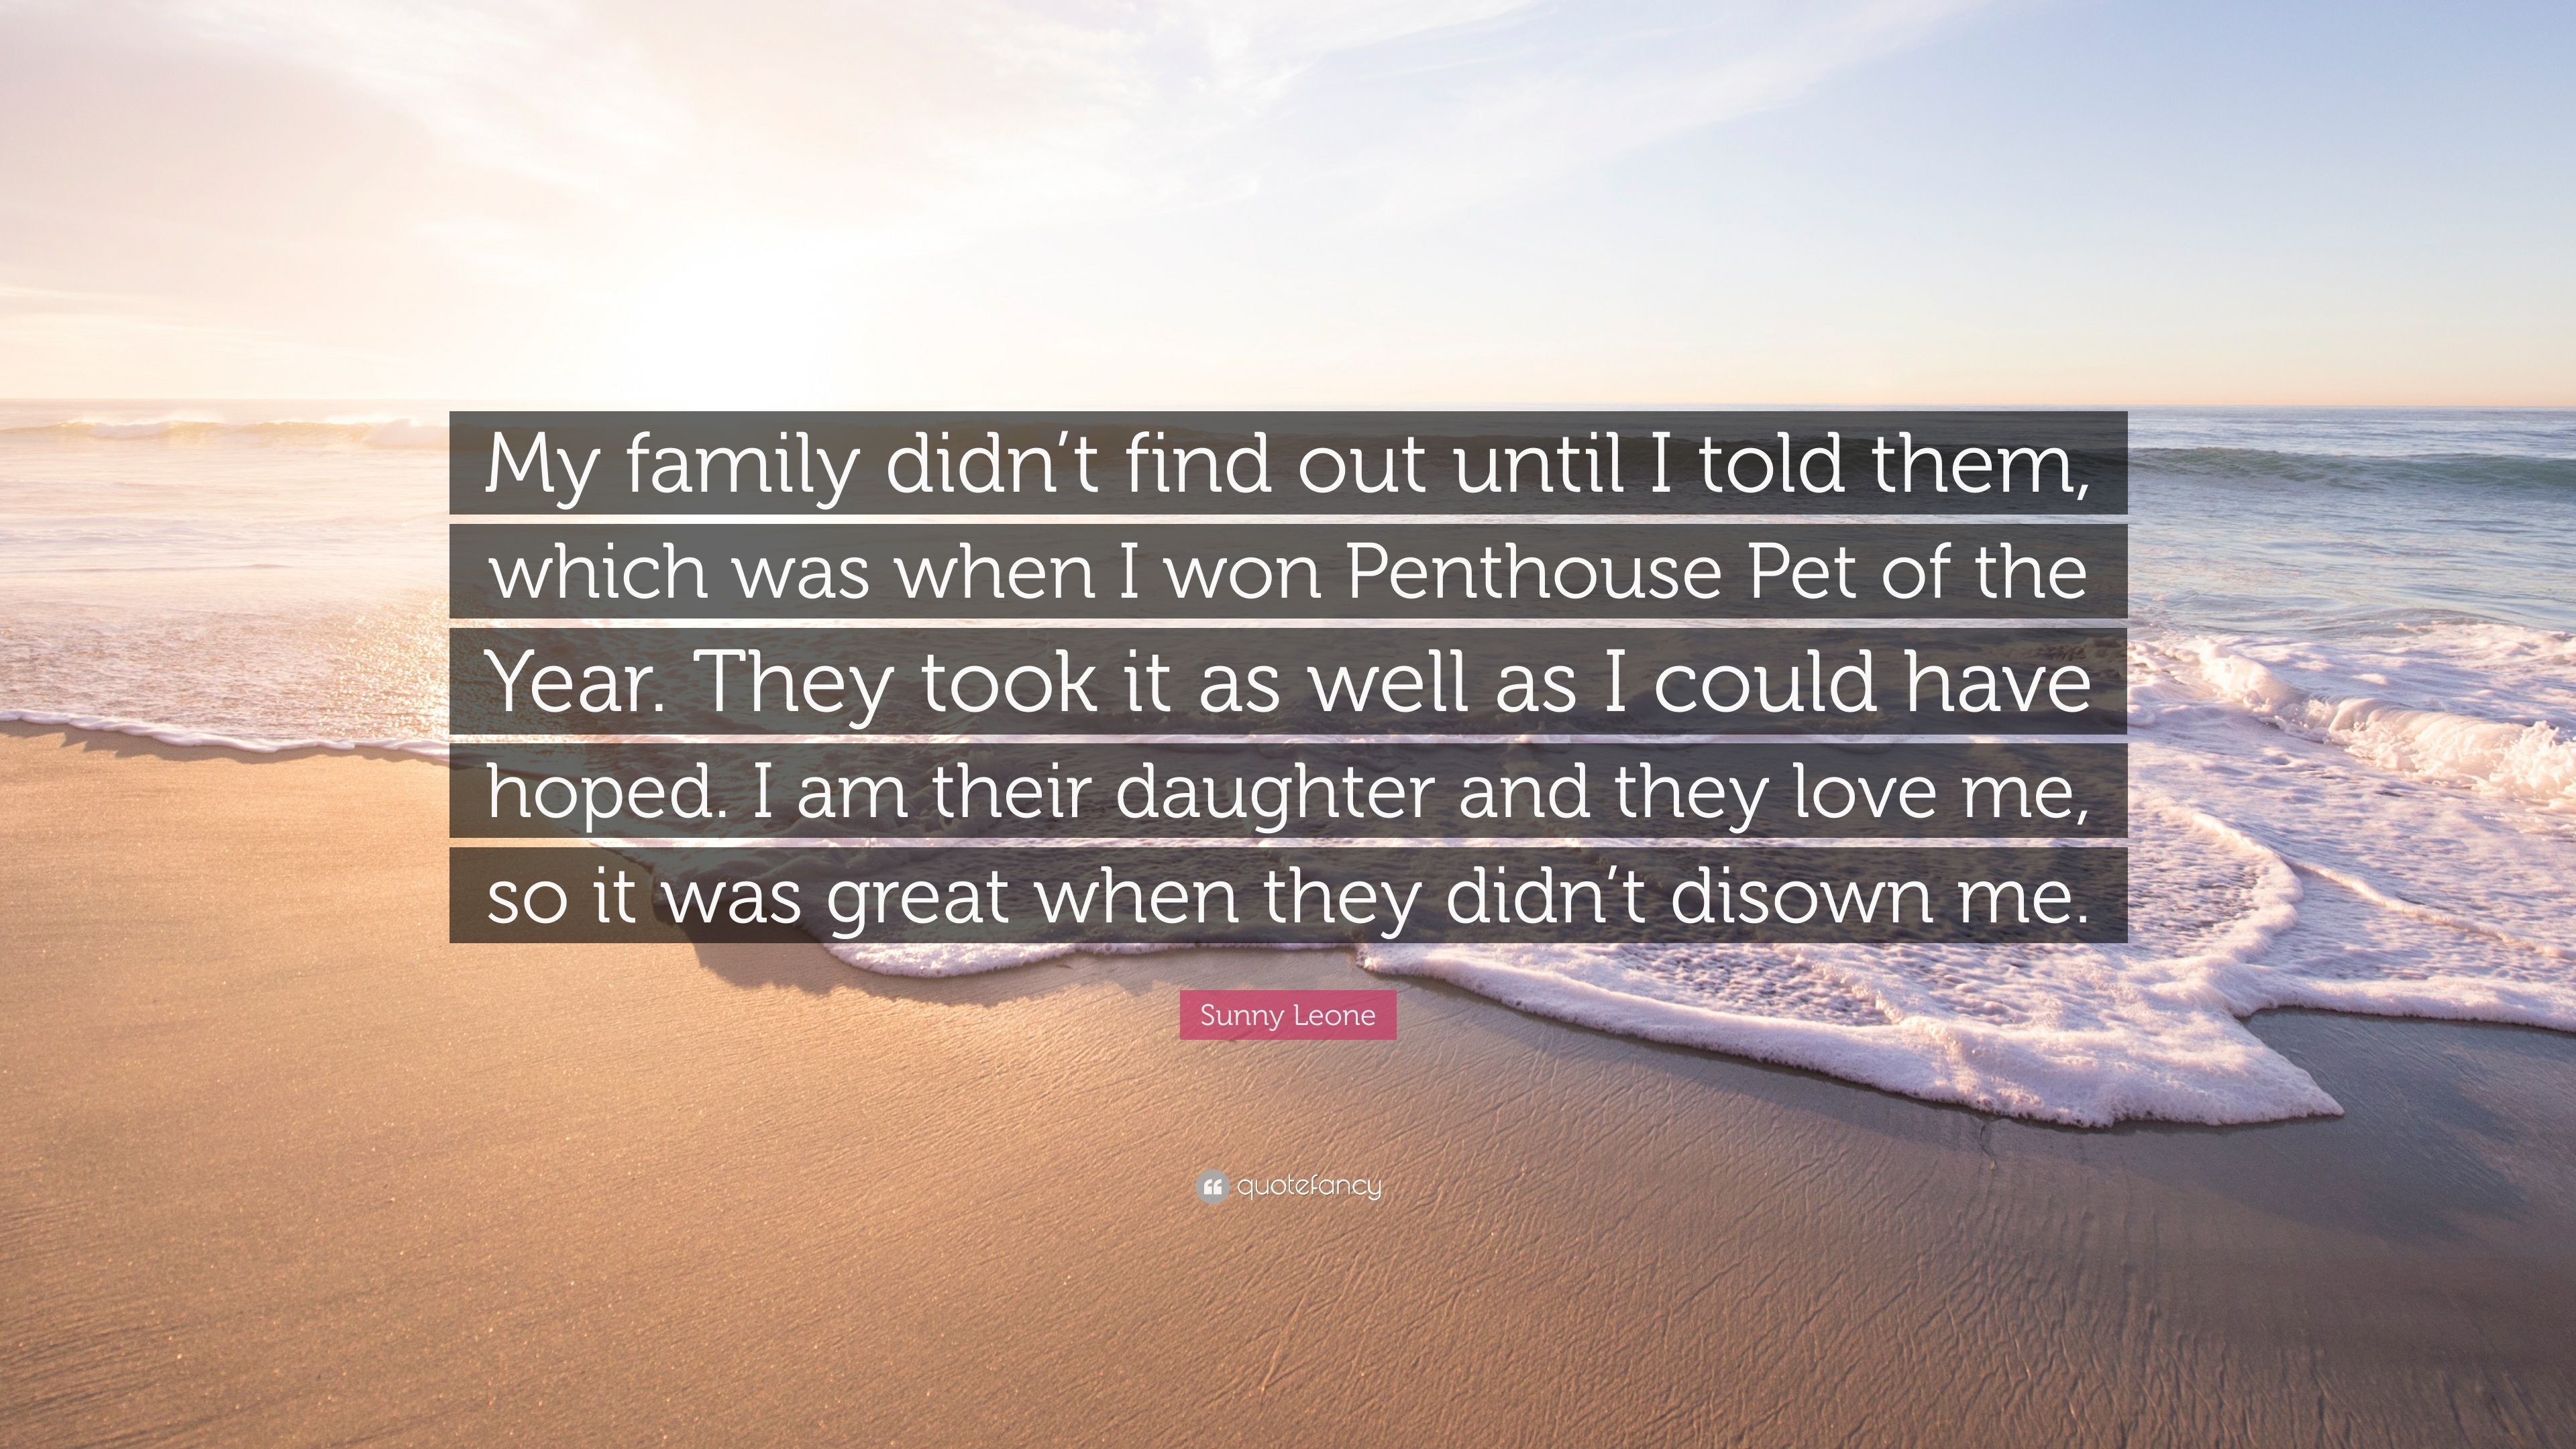 3840x2160 Sunny Leone Quote: “My family didn't find out until I told them